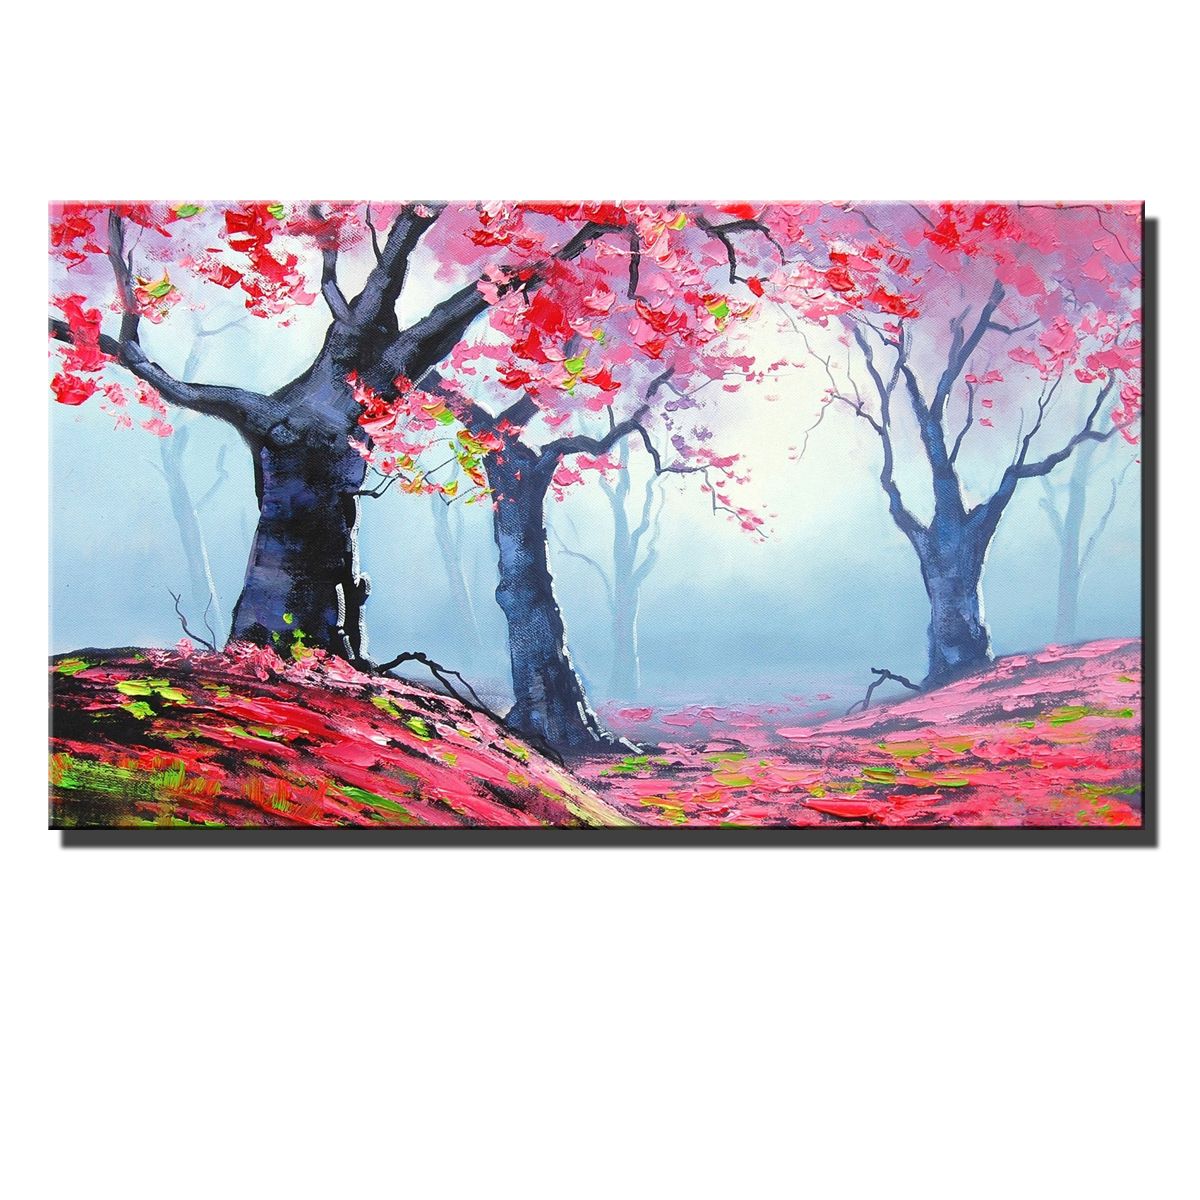 21 Beautiful Paintings Of Nature Hd Canvas Printing New Home Decoration Art Painting Unframed Framed From Dhqicai05 8 56 Dhgate Com